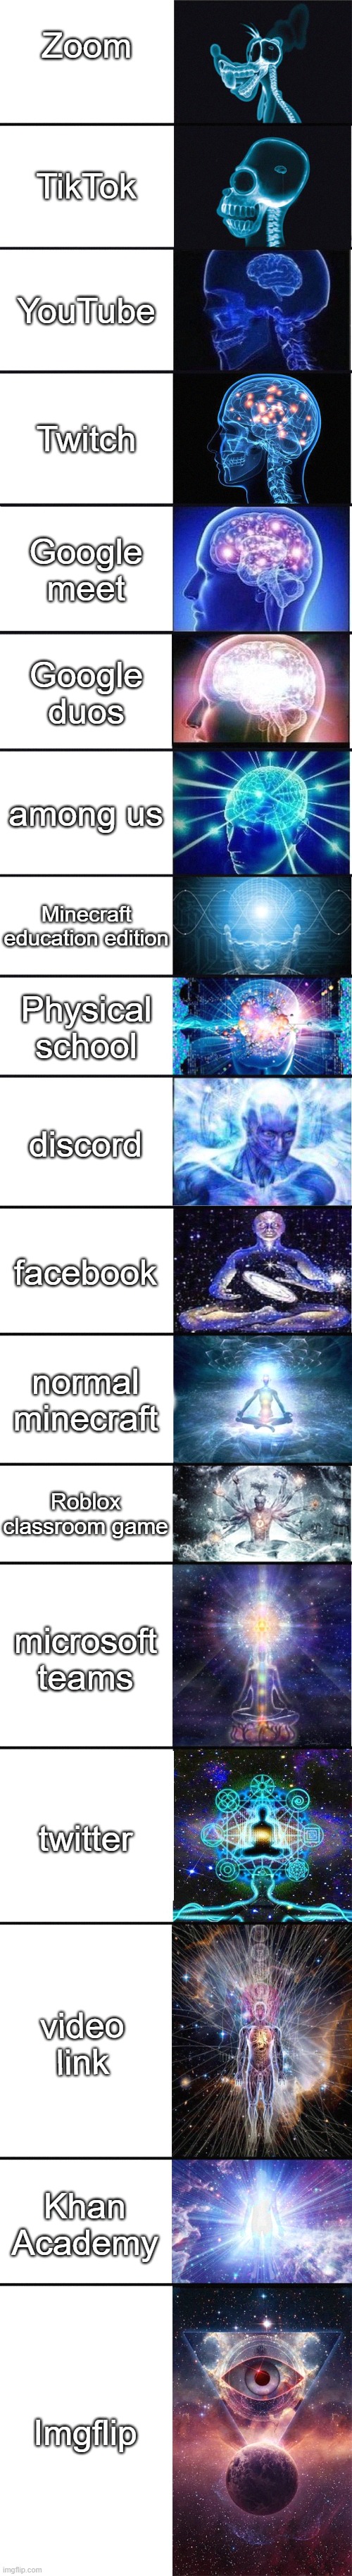 zoom = trash |  Zoom; TikTok; YouTube; Twitch; Google meet; Google duos; among us; Minecraft education edition; Physical school; discord; facebook; normal minecraft; Roblox classroom game; microsoft teams; twitter; video link; Khan Academy; Imgflip | image tagged in expanding brain 9001 | made w/ Imgflip meme maker